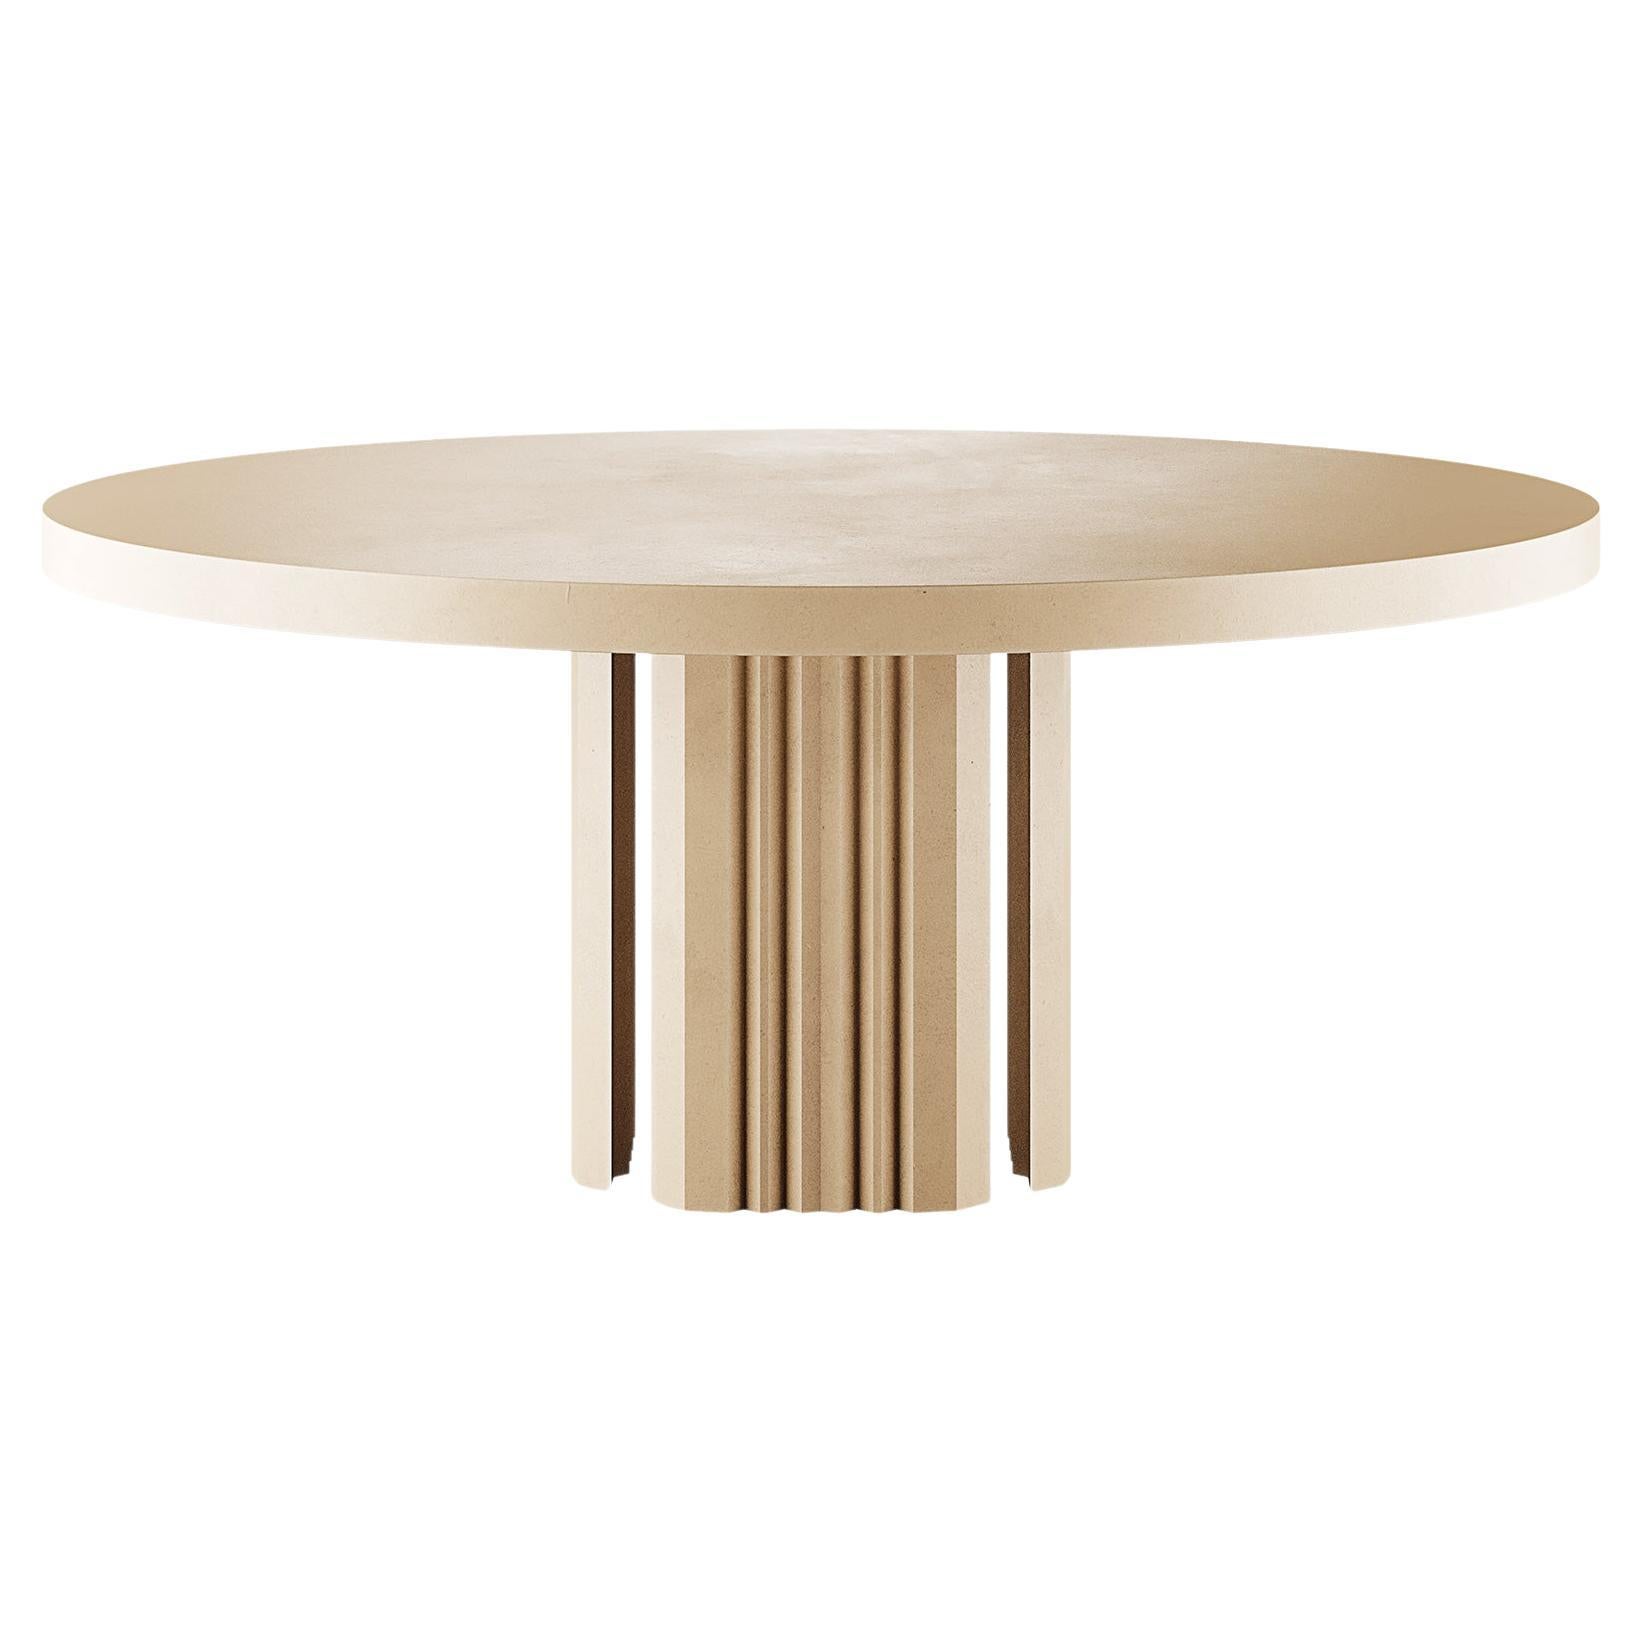 Scandinavian Moder Dining Table Wood Structure Finished in Micro-Cement in Sand 